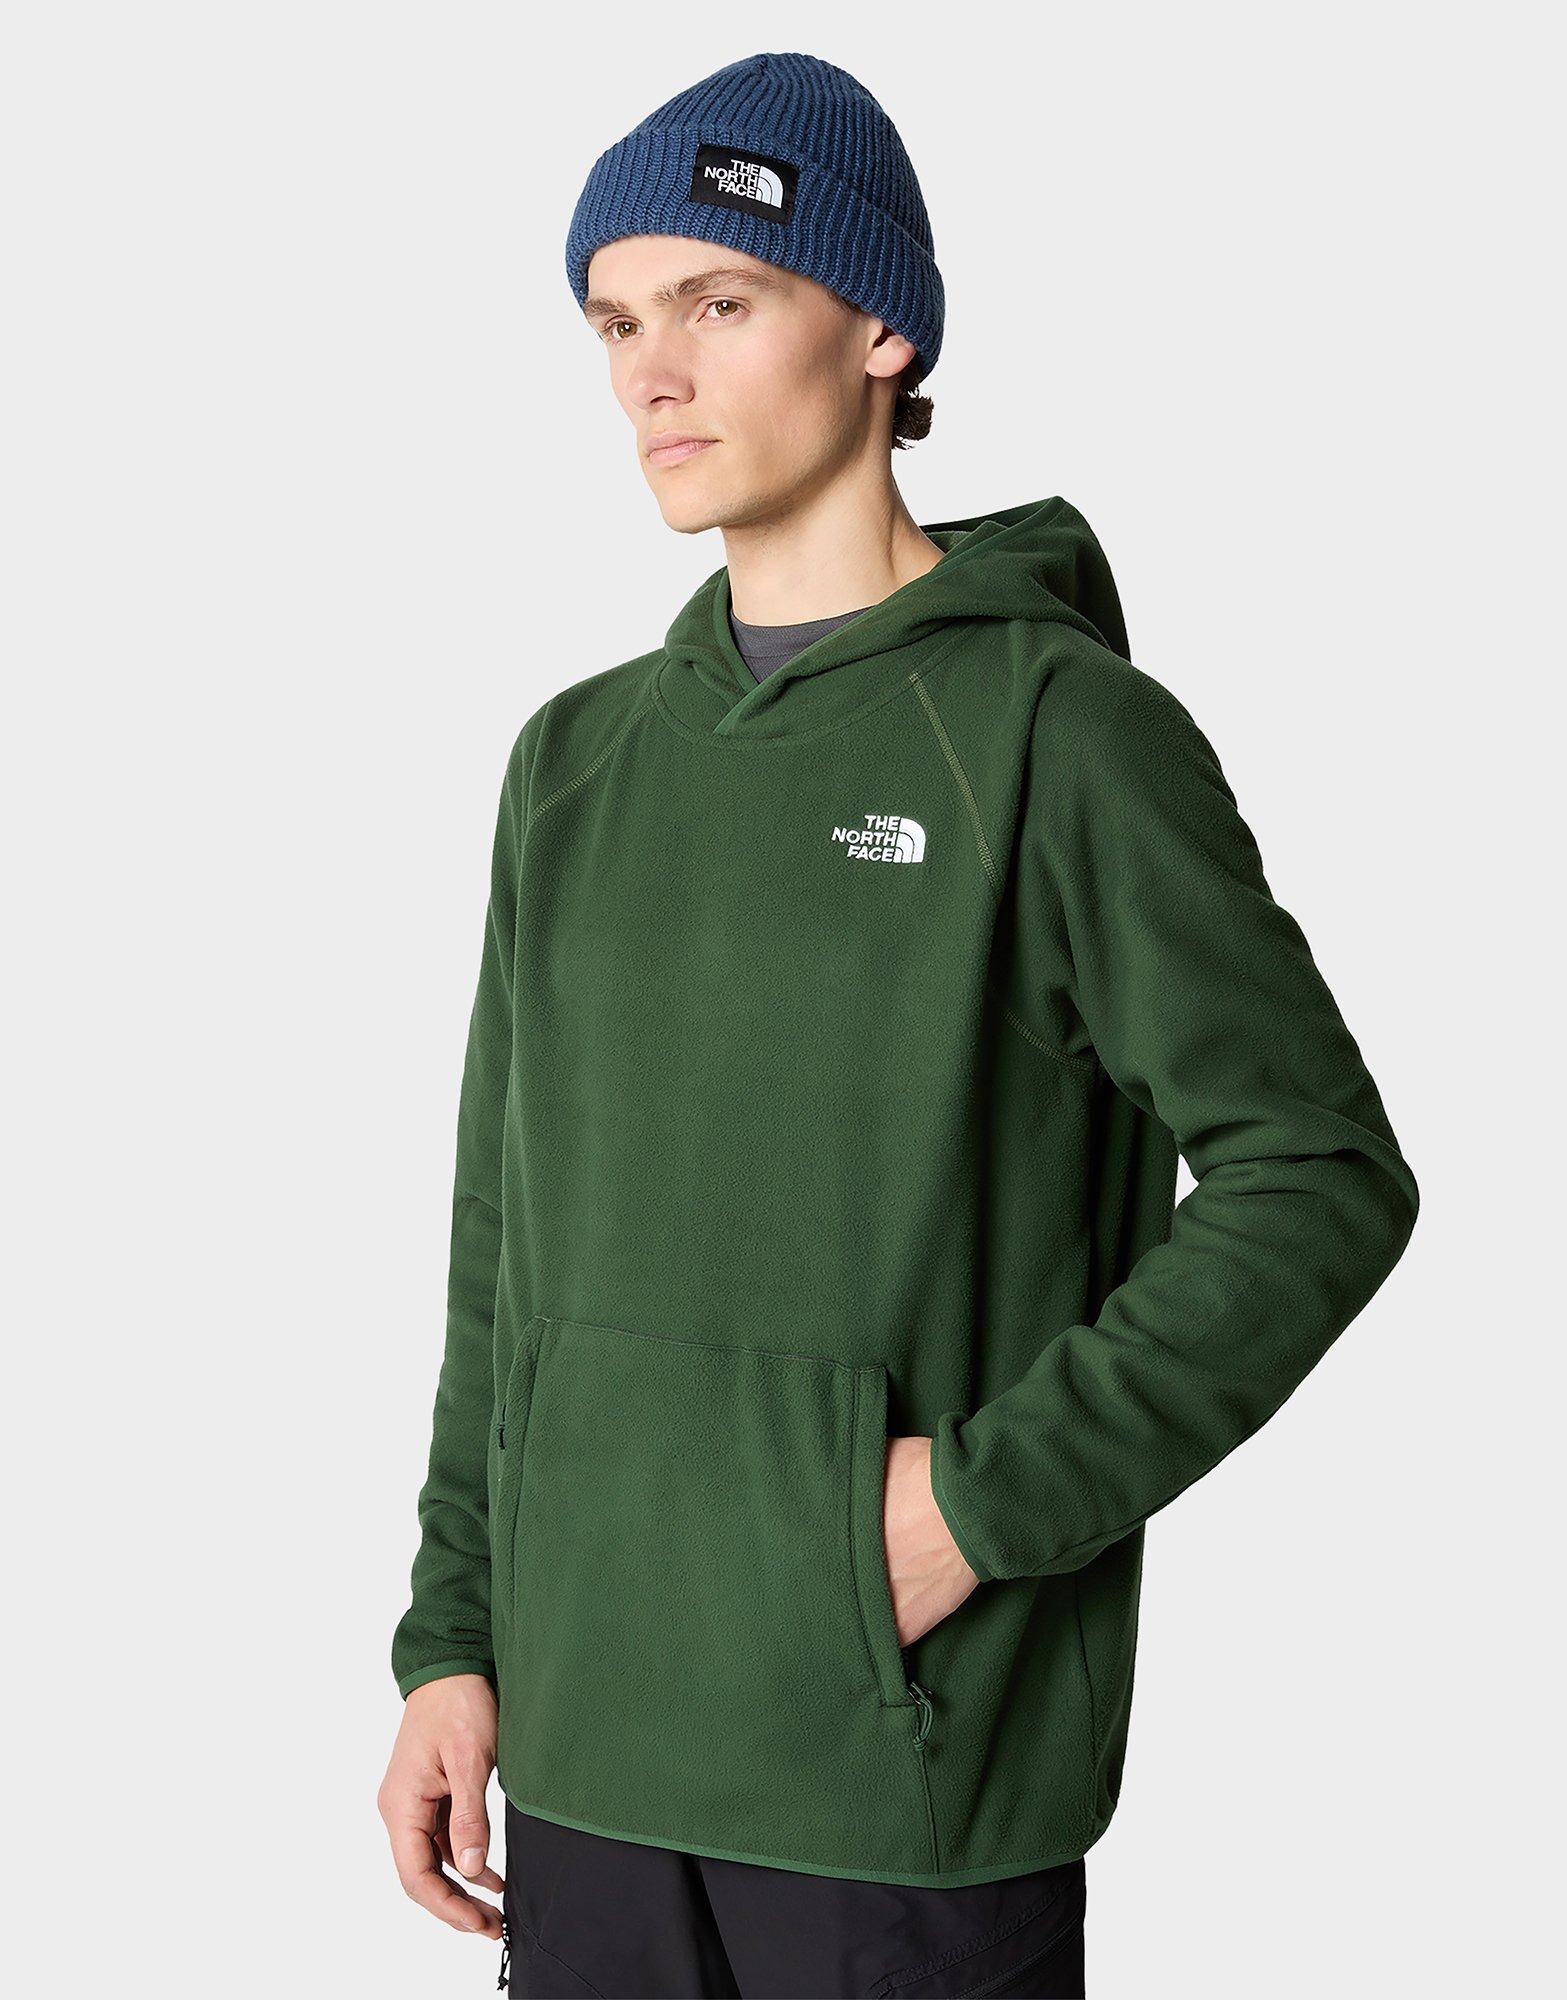 Green The North Face 100 Glacier Hoodie | JD Sports UK